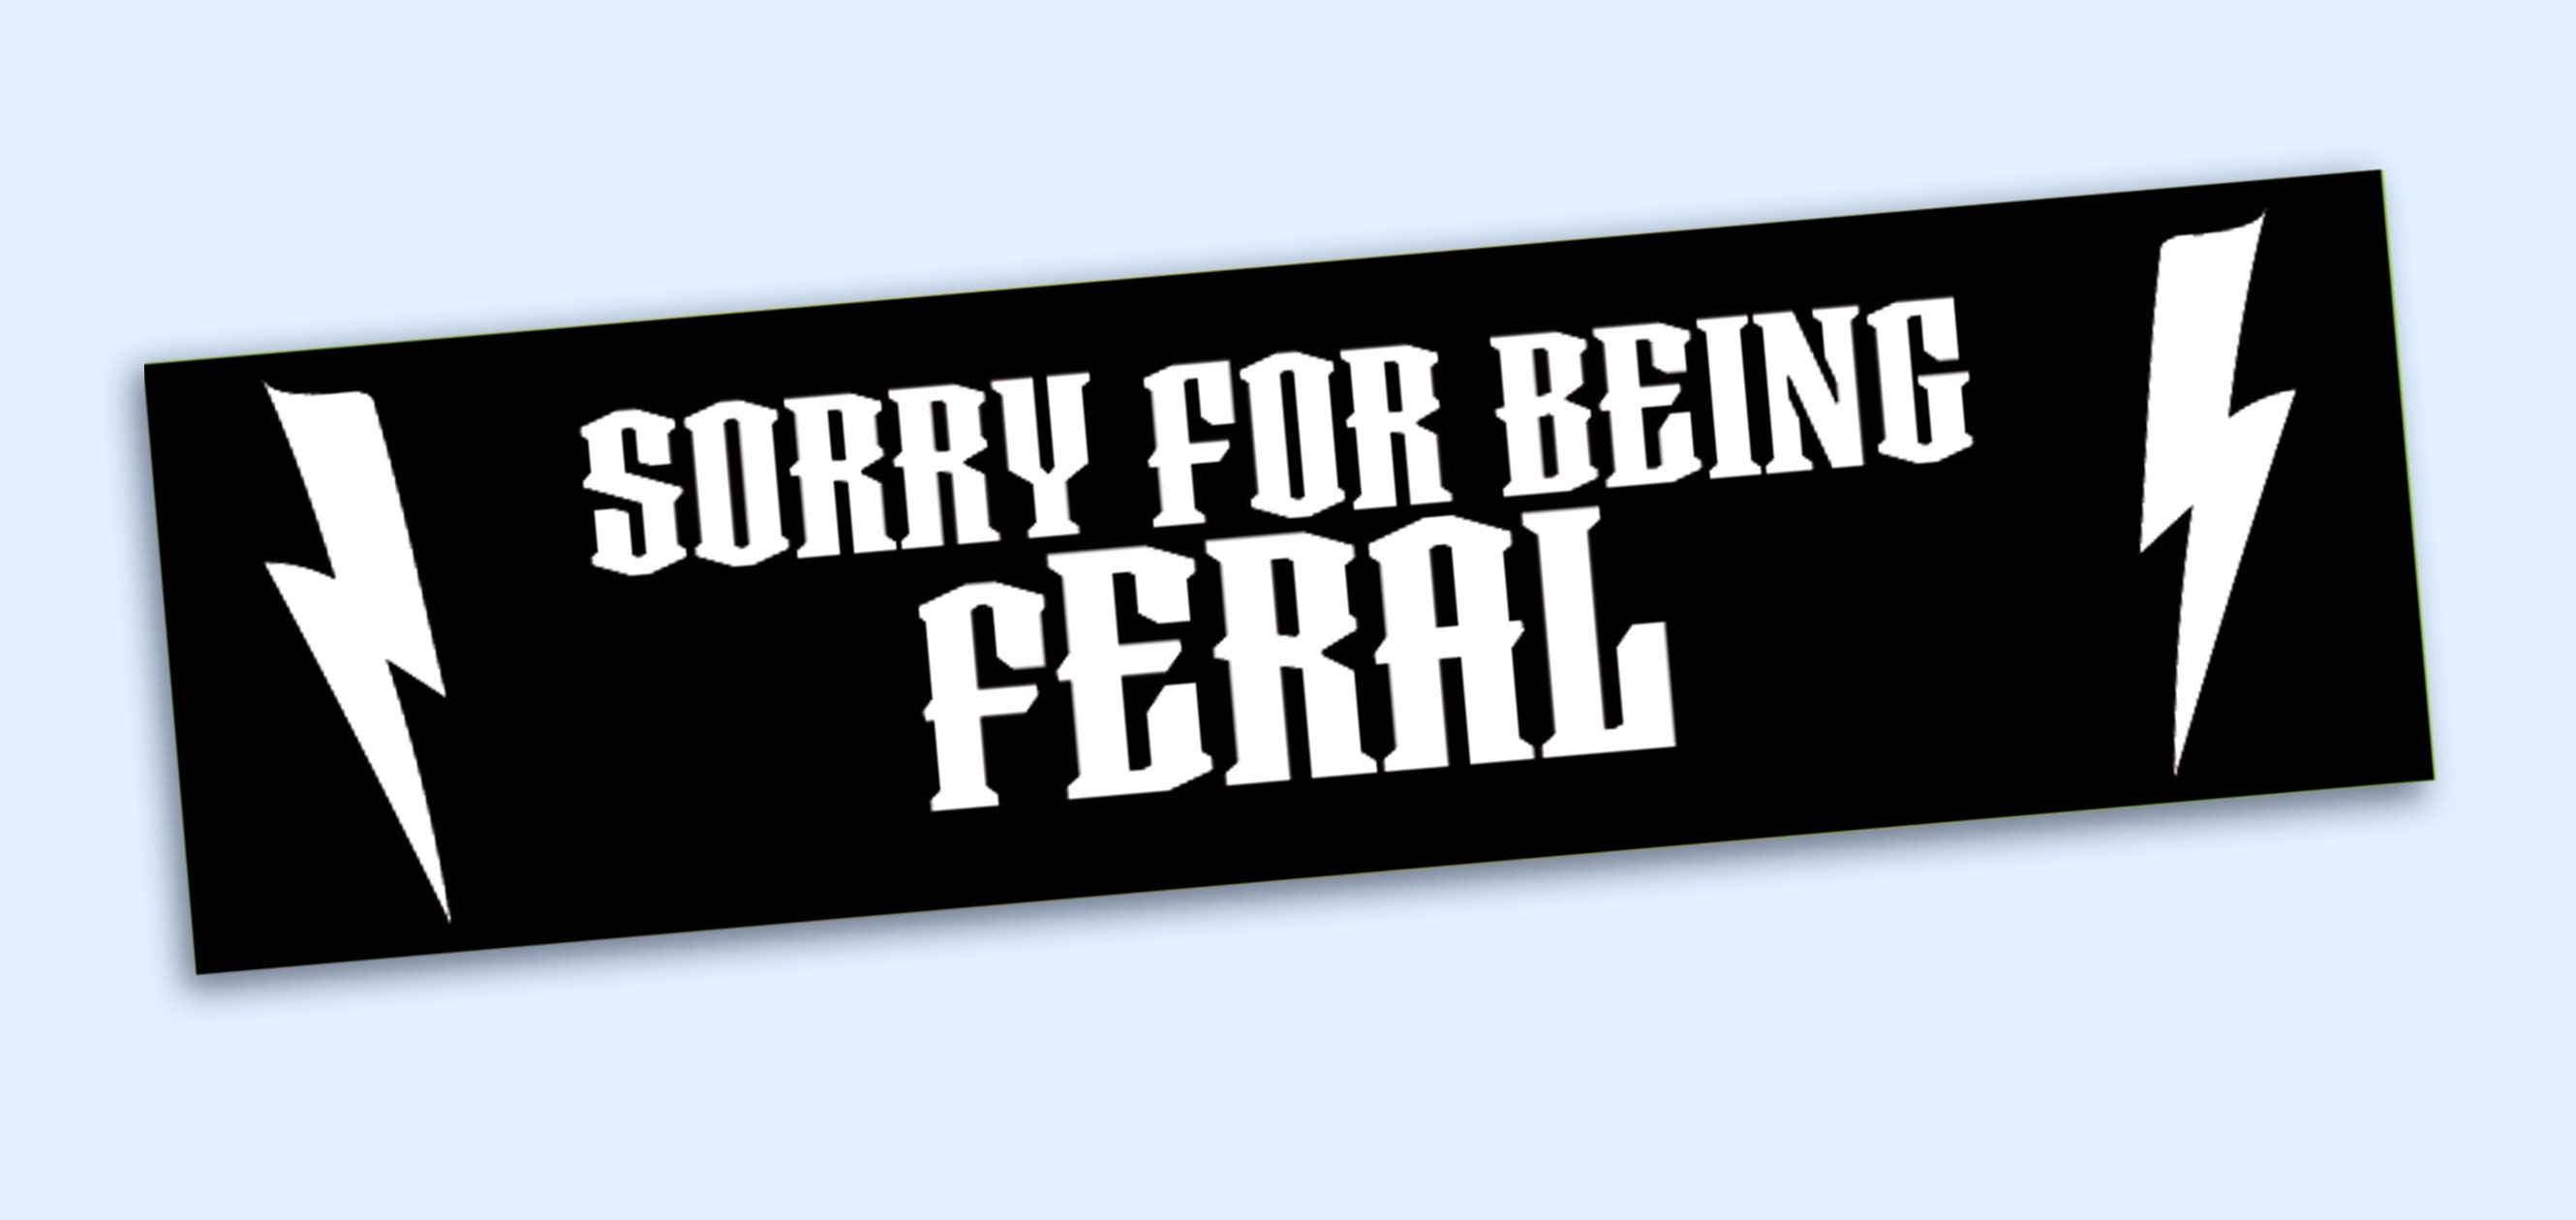 Sorry For Being Feral Bumper Sticker